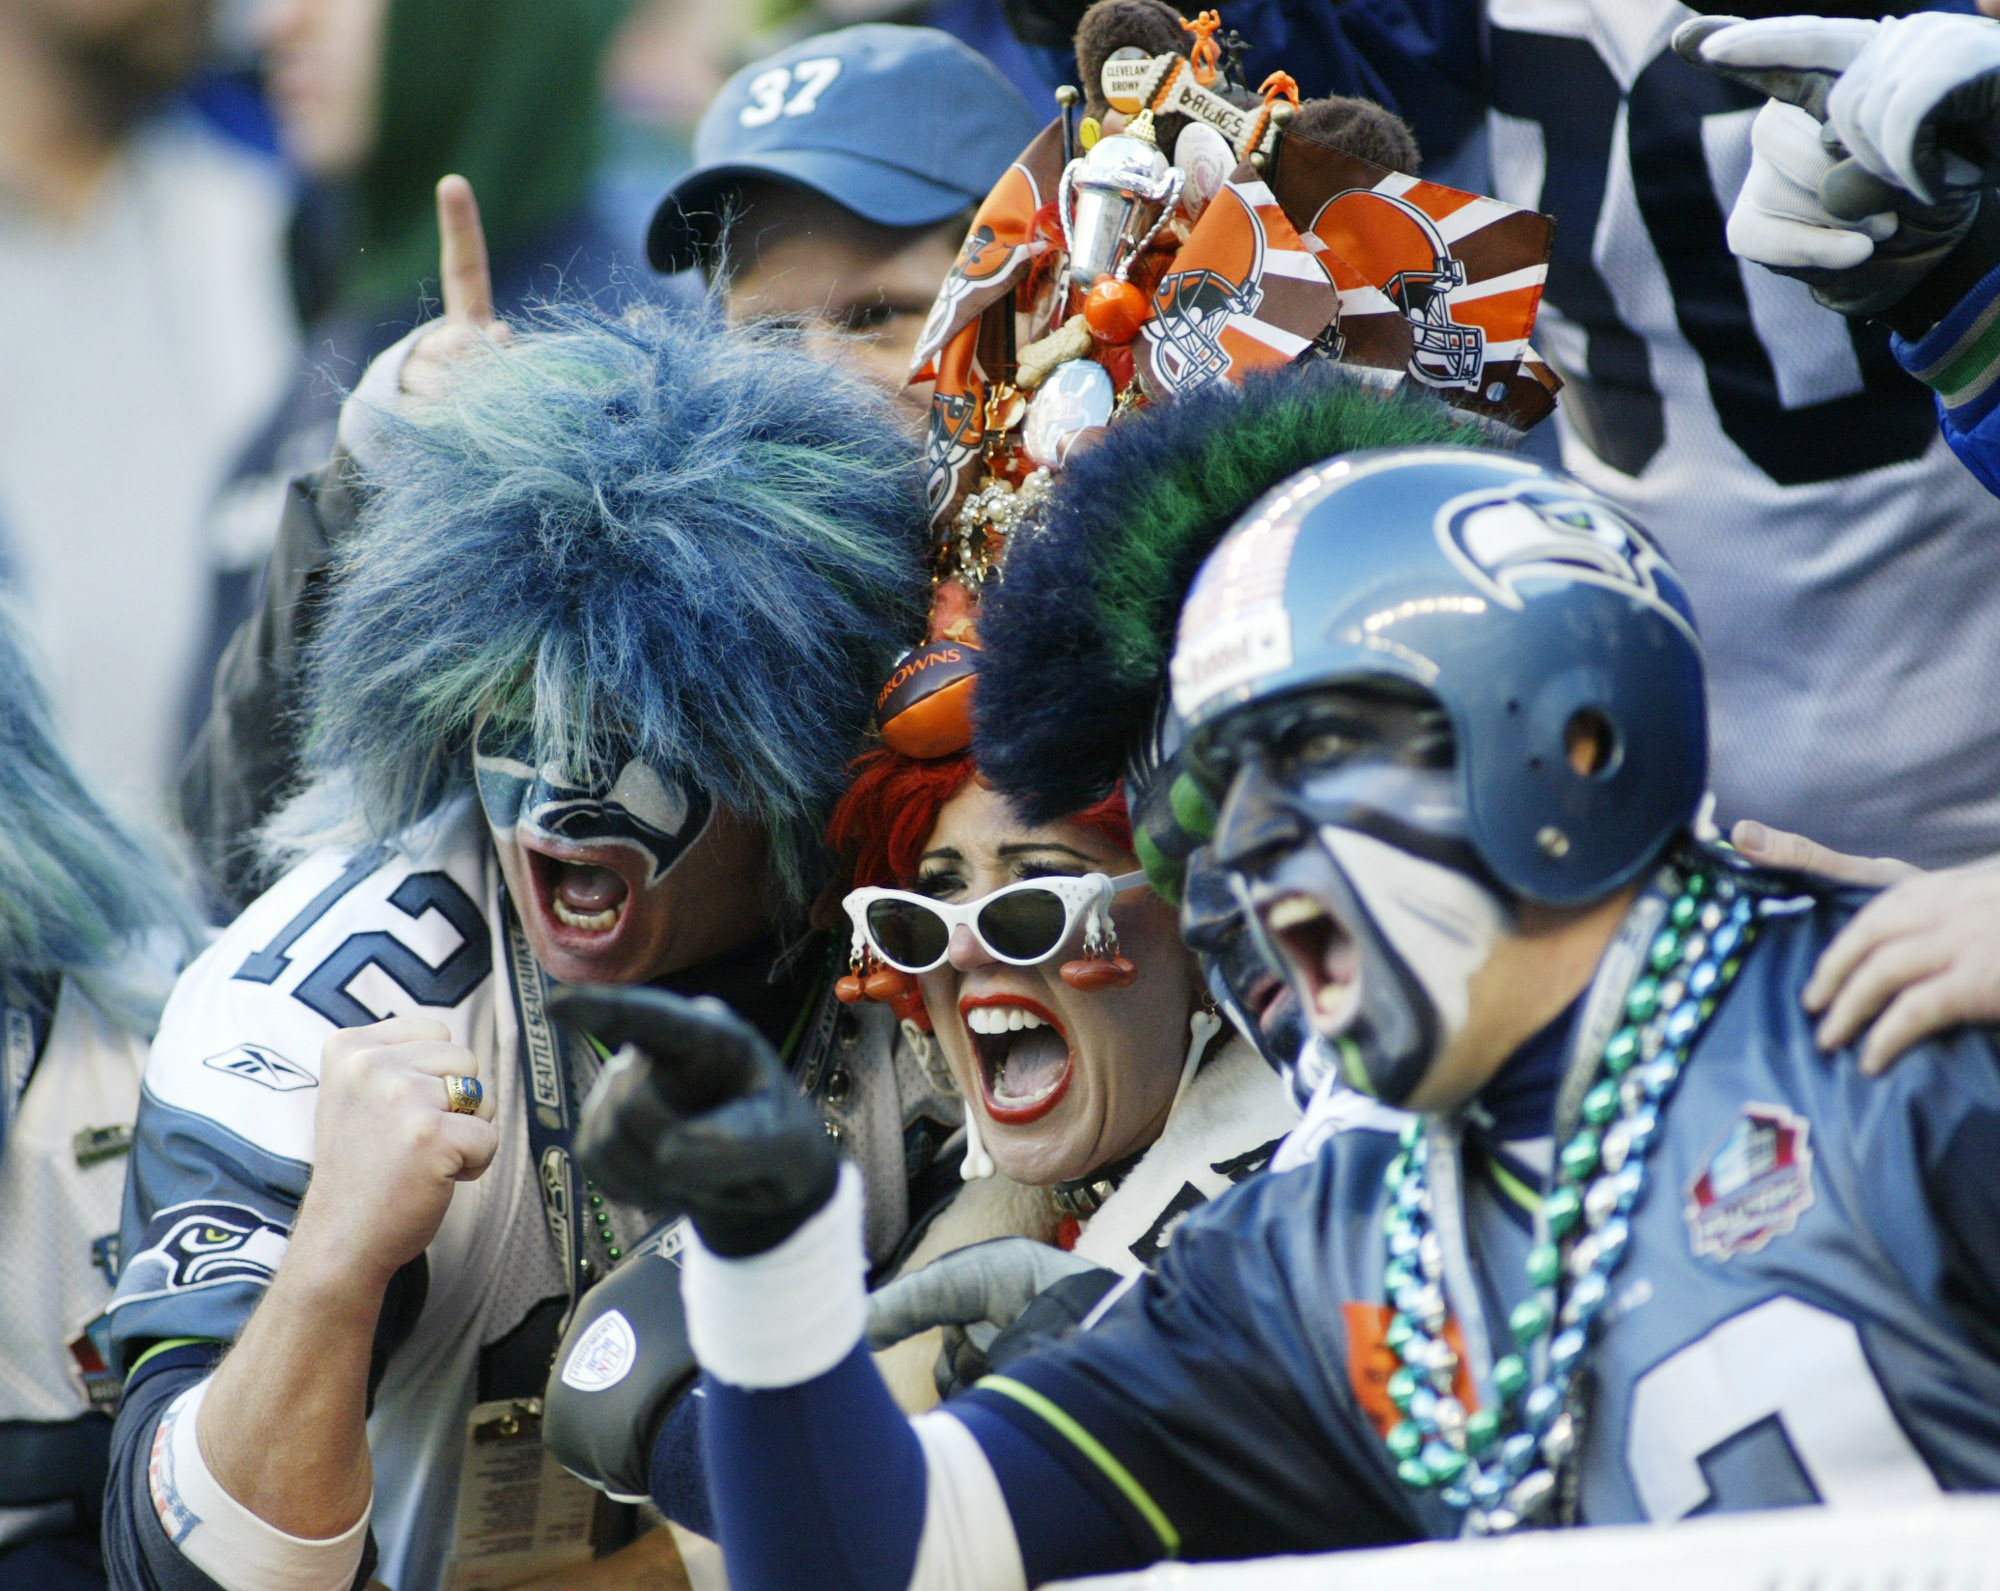 Seattle Seahawks fans surround a Cleveland Browns fan as she mugs for TV cameras Sunday, Nov. 30, 2003 at Seahawks Stadium in Seattle. (AP Photo/Ted S. Warren)